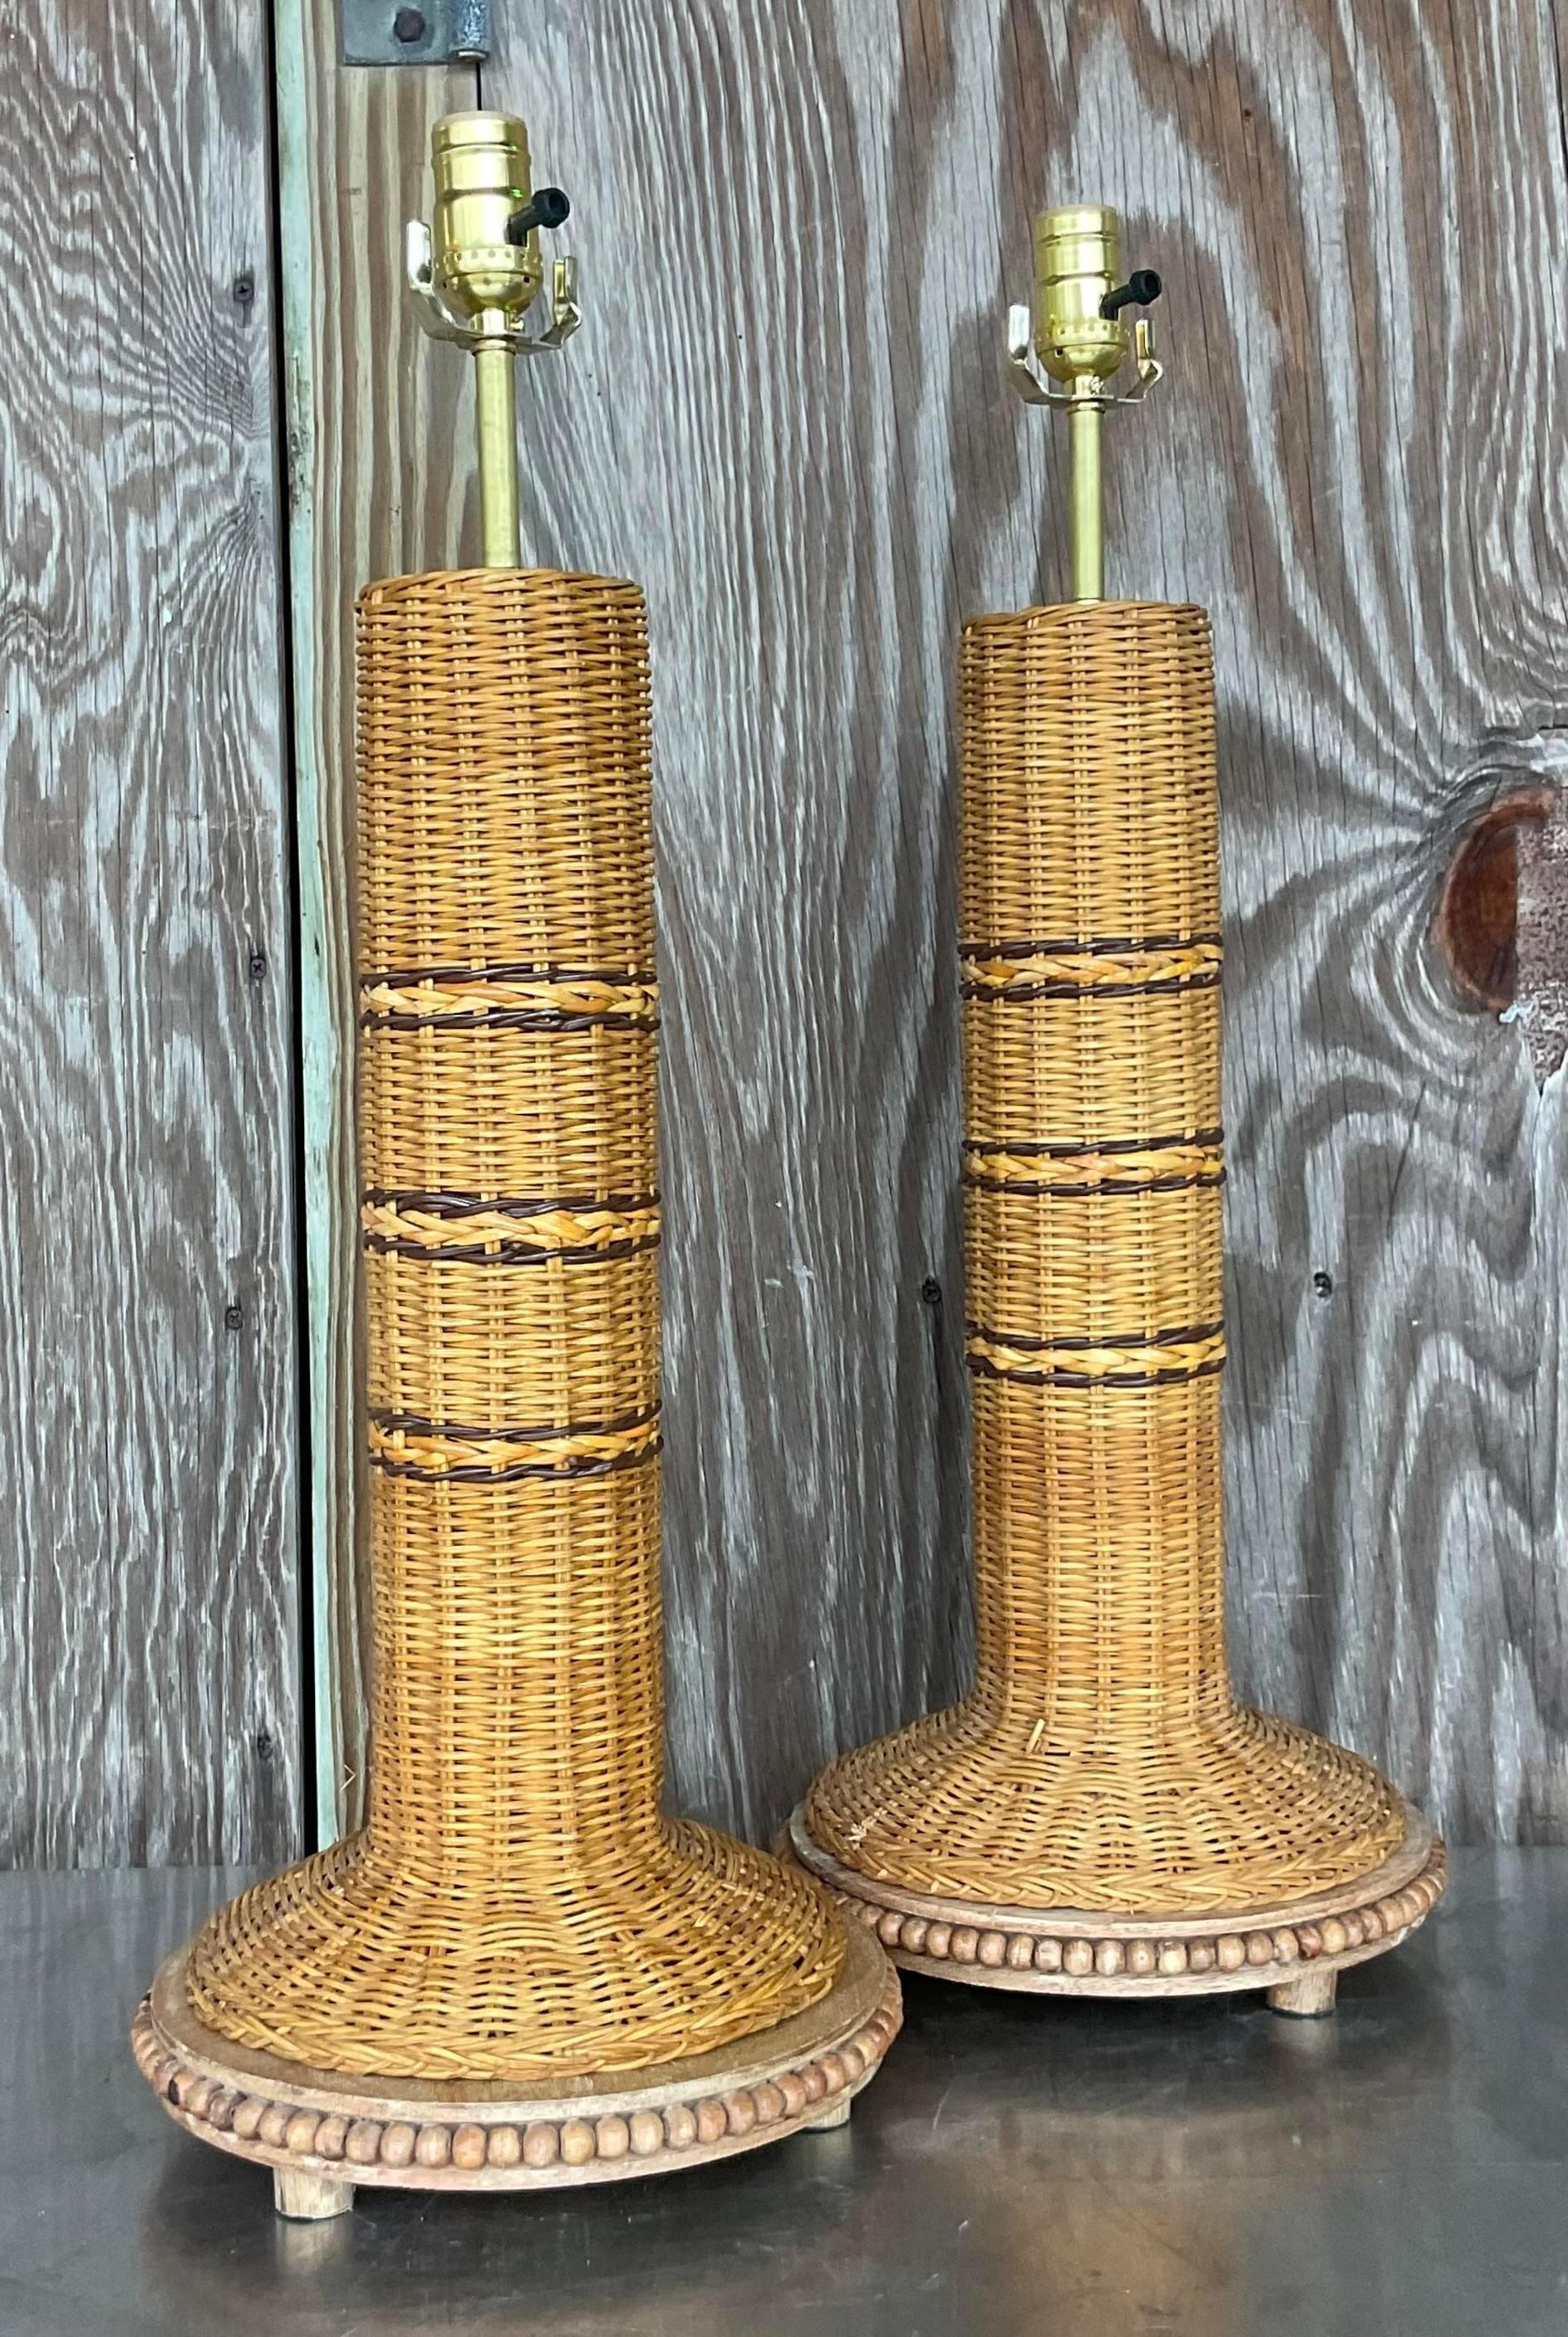 A fabulous pair of vintage Coastal table lamps. Chic woven rattan in natural with stripes of chocolate brown. Fully restored with all new wiring and hardware. Acquired from a Palm Beach estate.